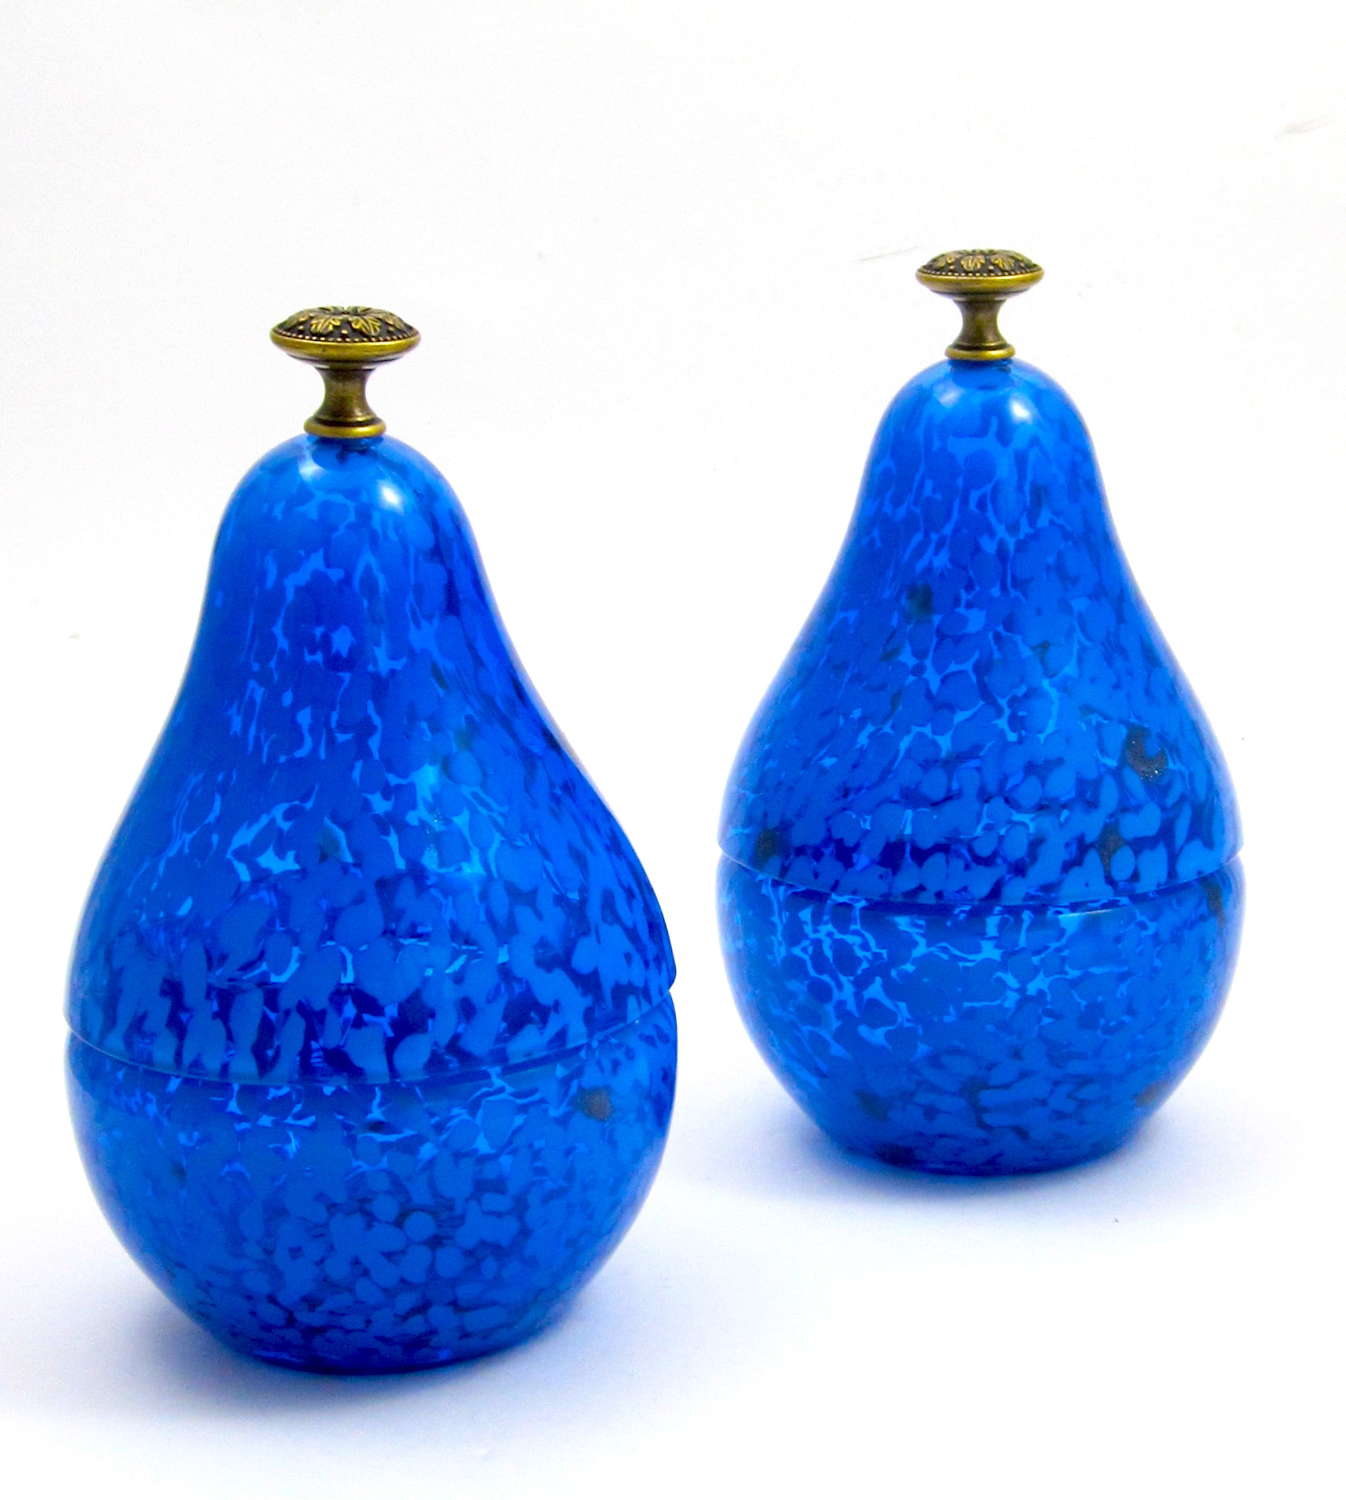 Unusual Pair of Vintage Glass Pear Boxes with Dore Bronze Finials